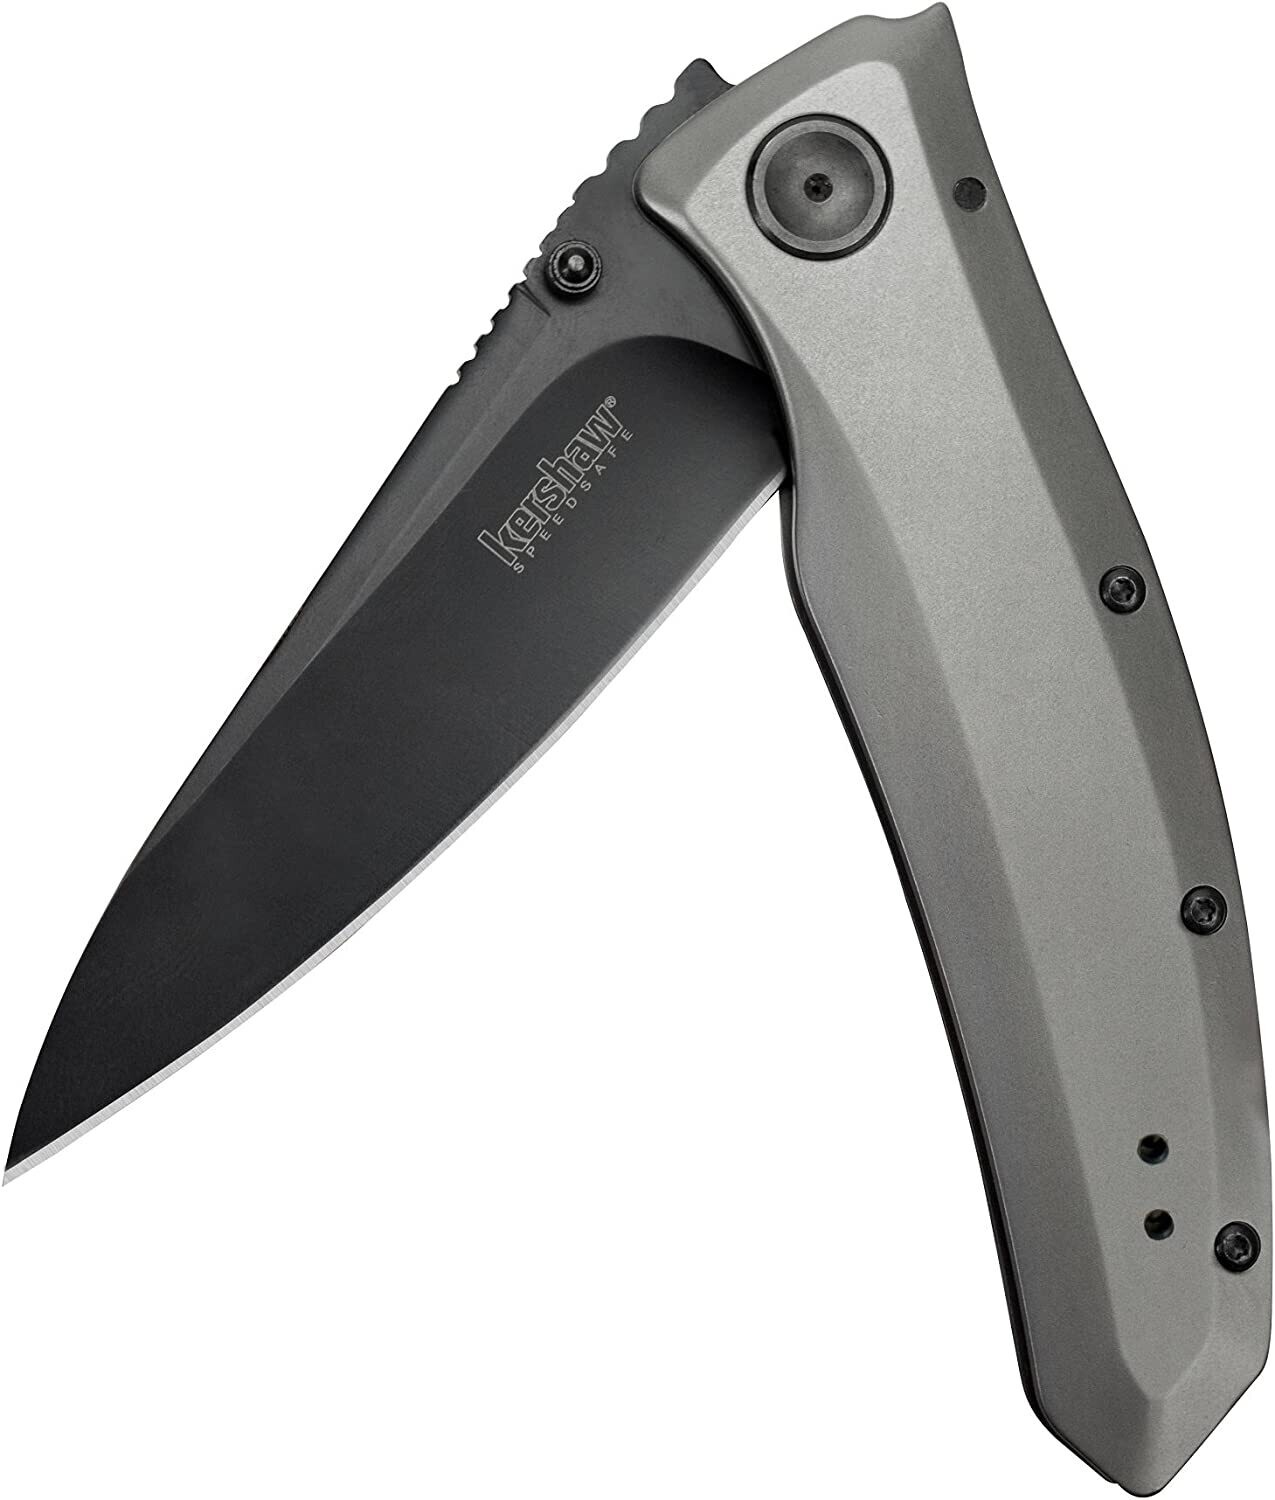 Kershaw 2200 Grid Assisted Opening Folding Drop Point Knife 3.7" Blade